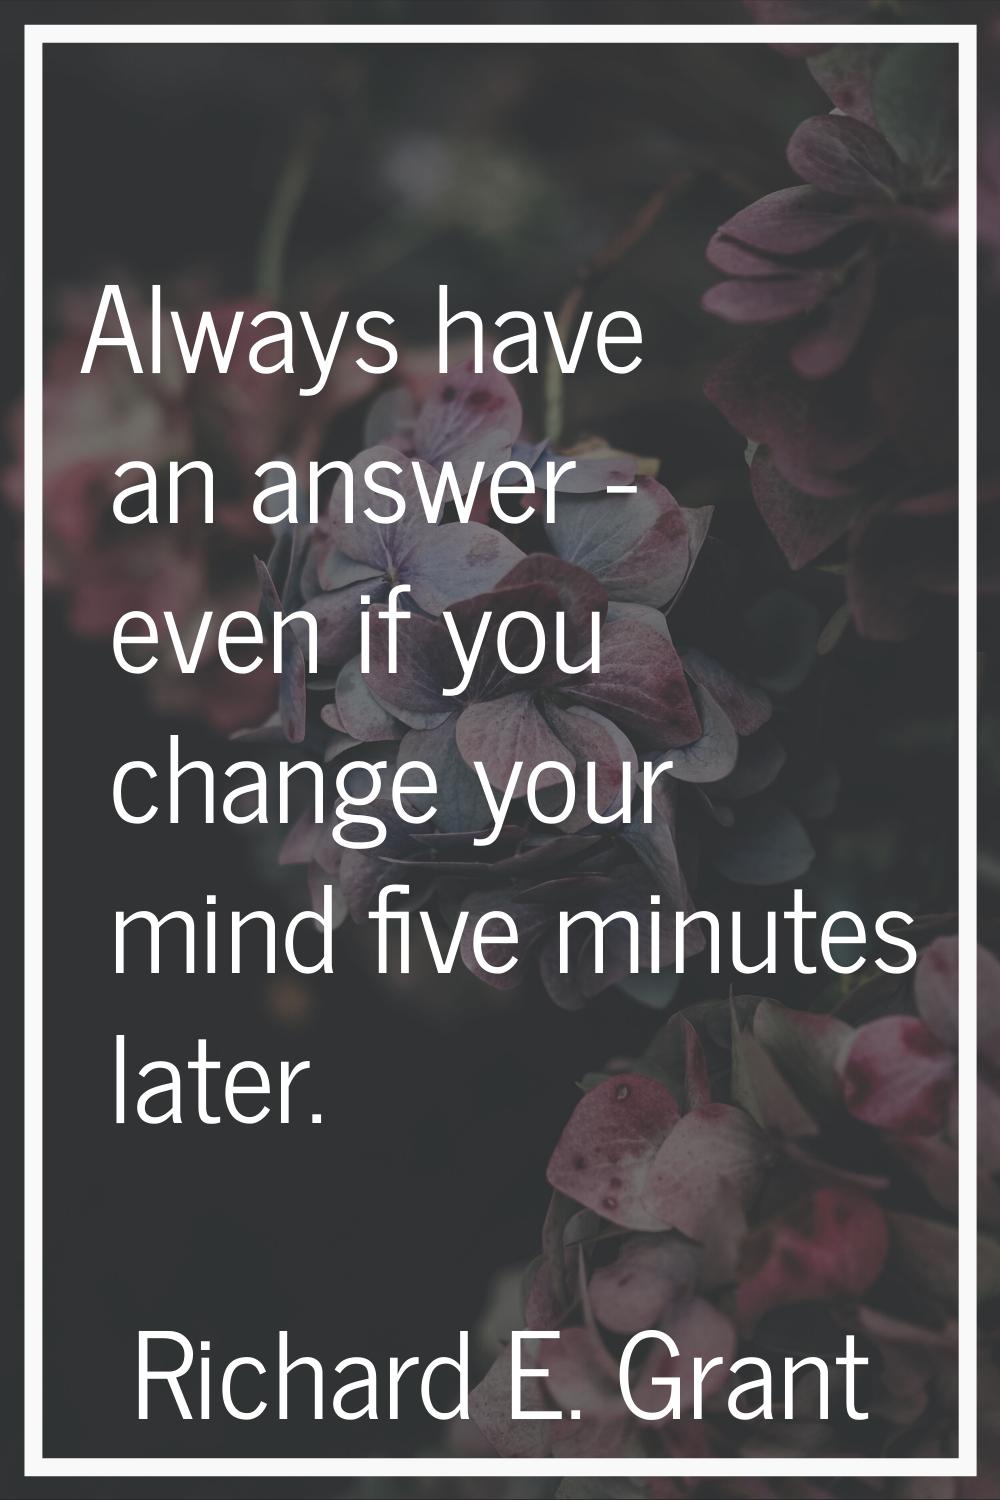 Always have an answer - even if you change your mind five minutes later.